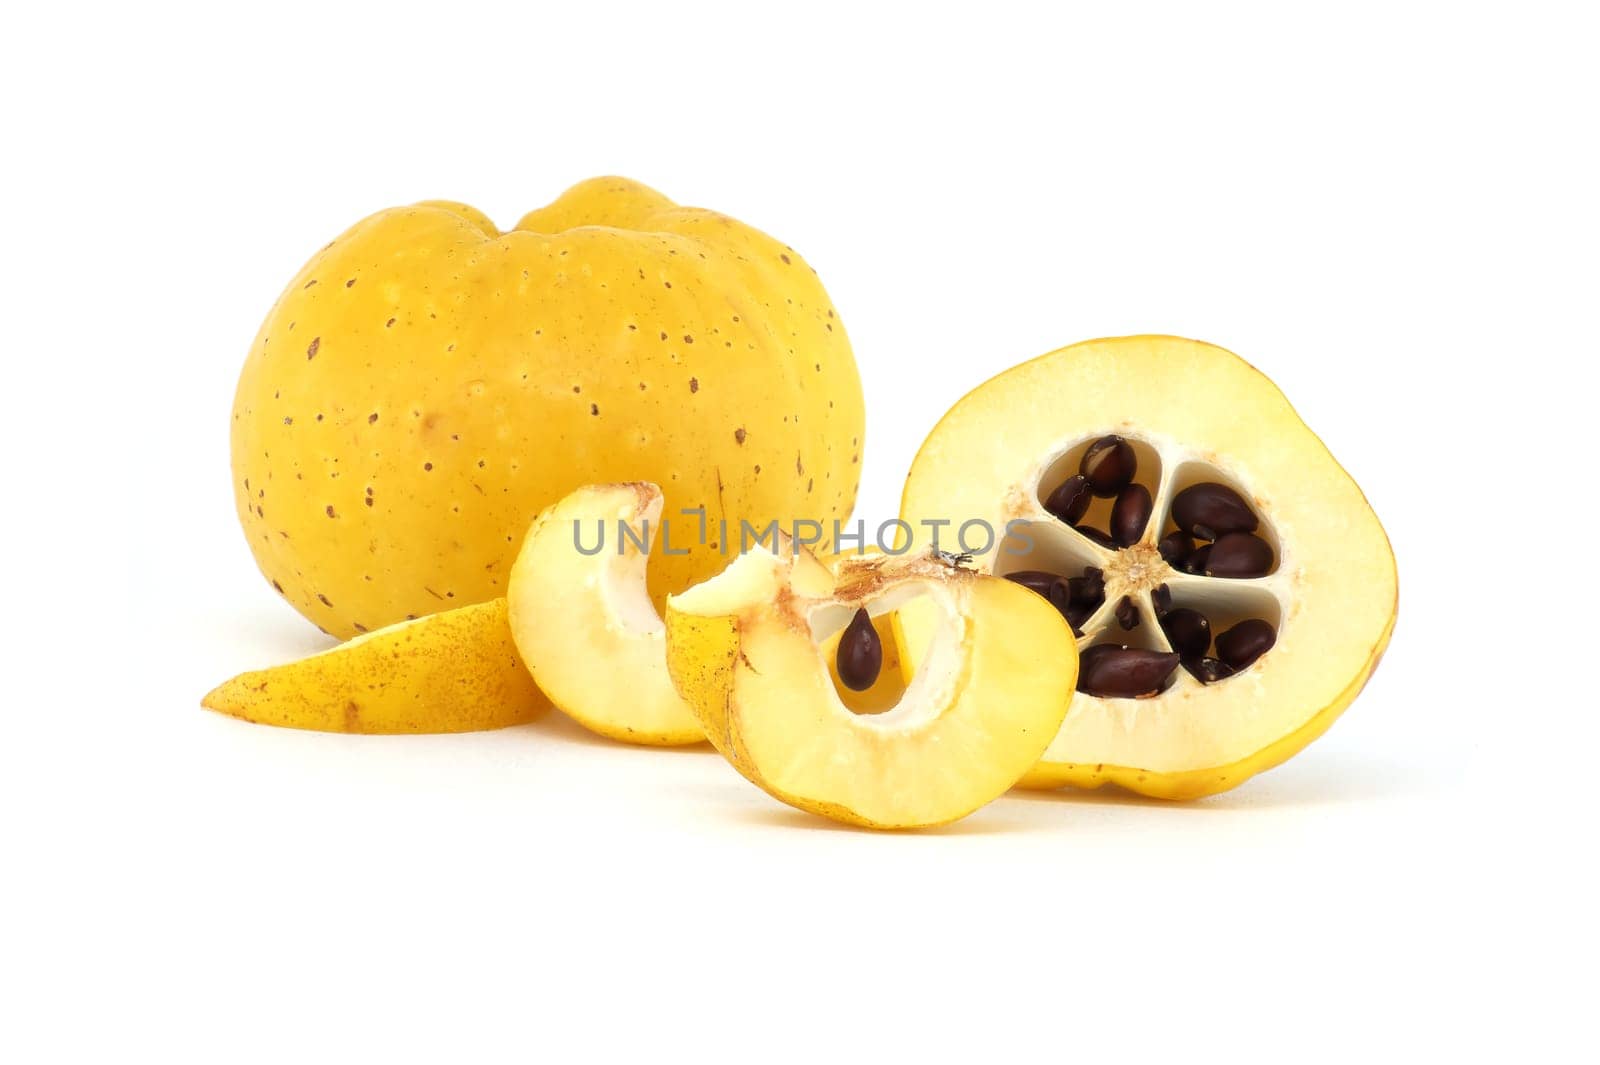 Halved quince with seeds visible over white background by NetPix